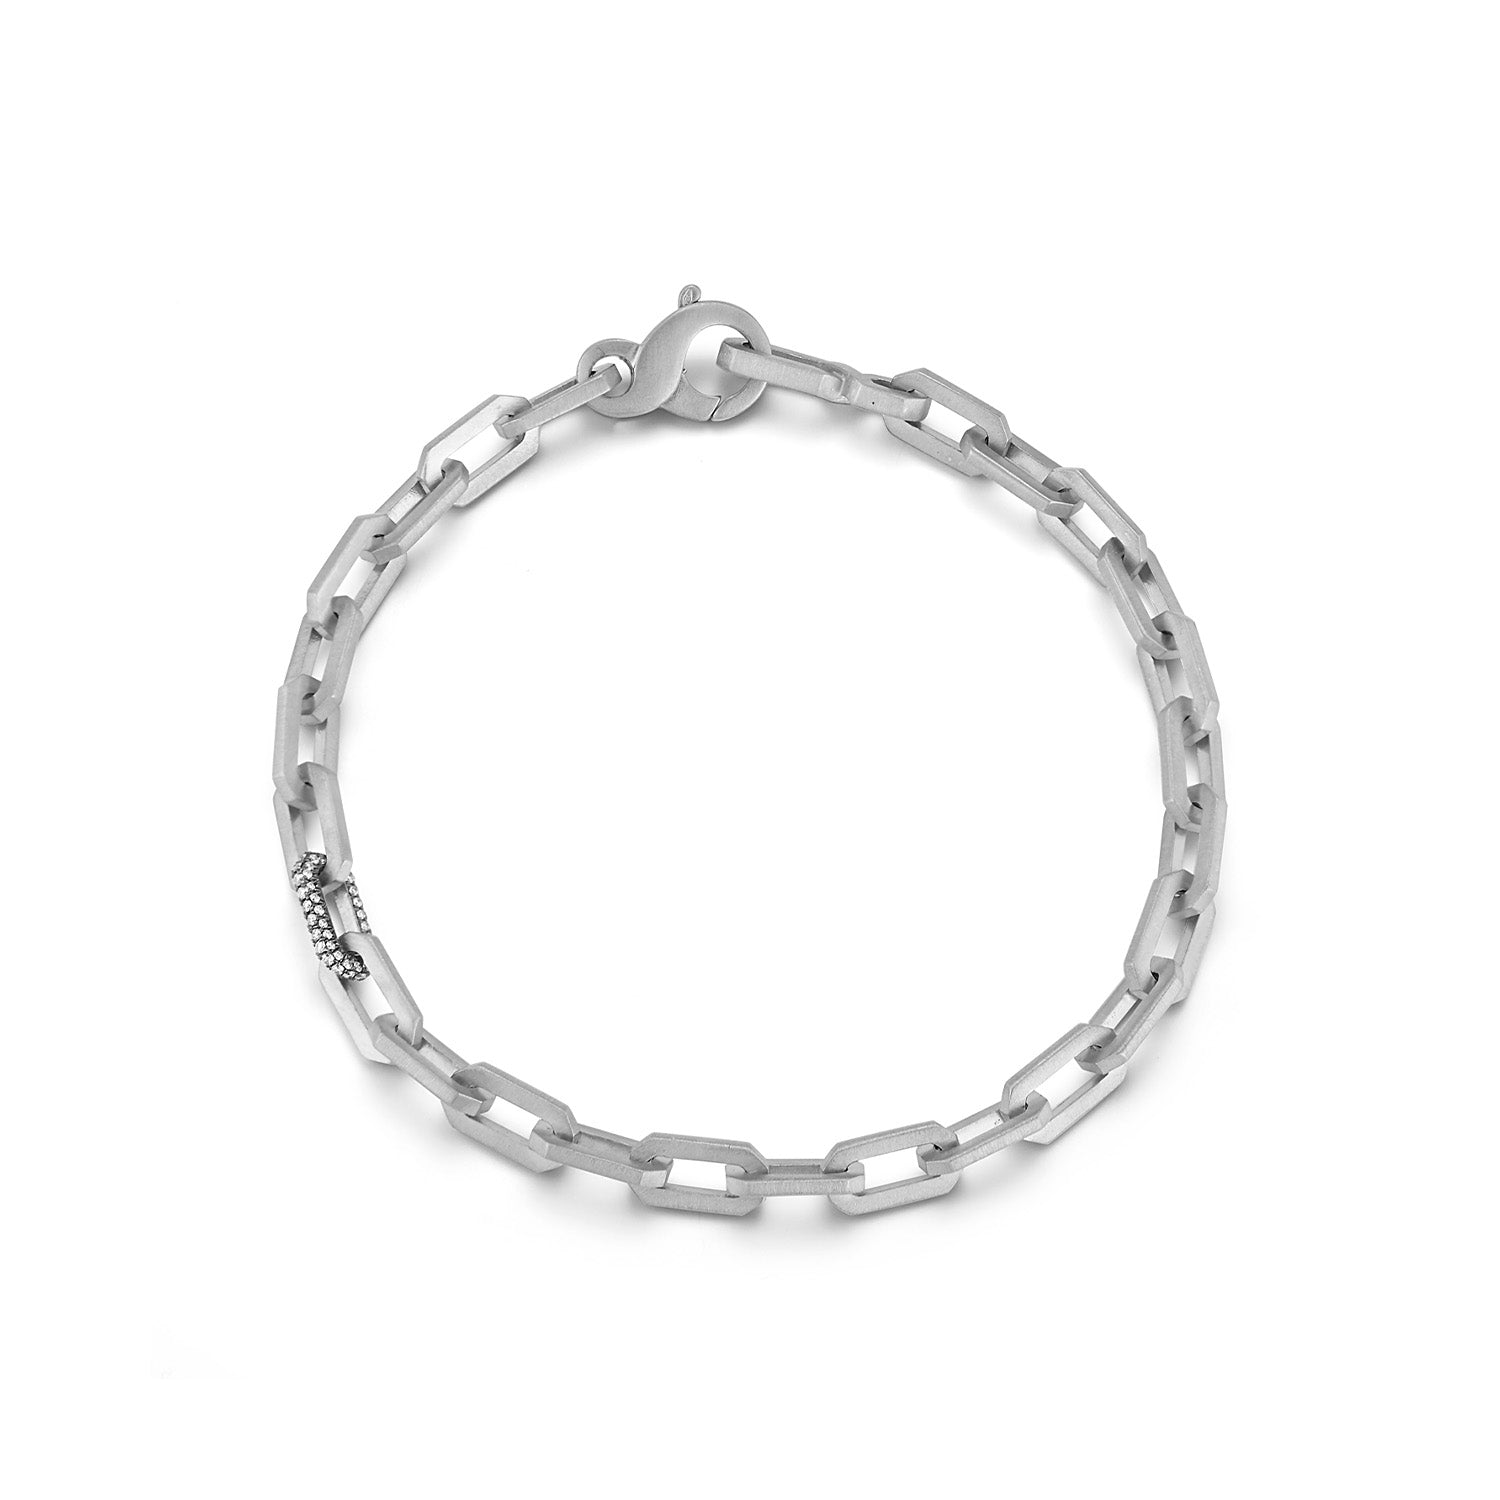 Solid Silver Chain Bracelet Handcrafted Thick Link Pure Silver 8326 -  Cindy's Art & Soul